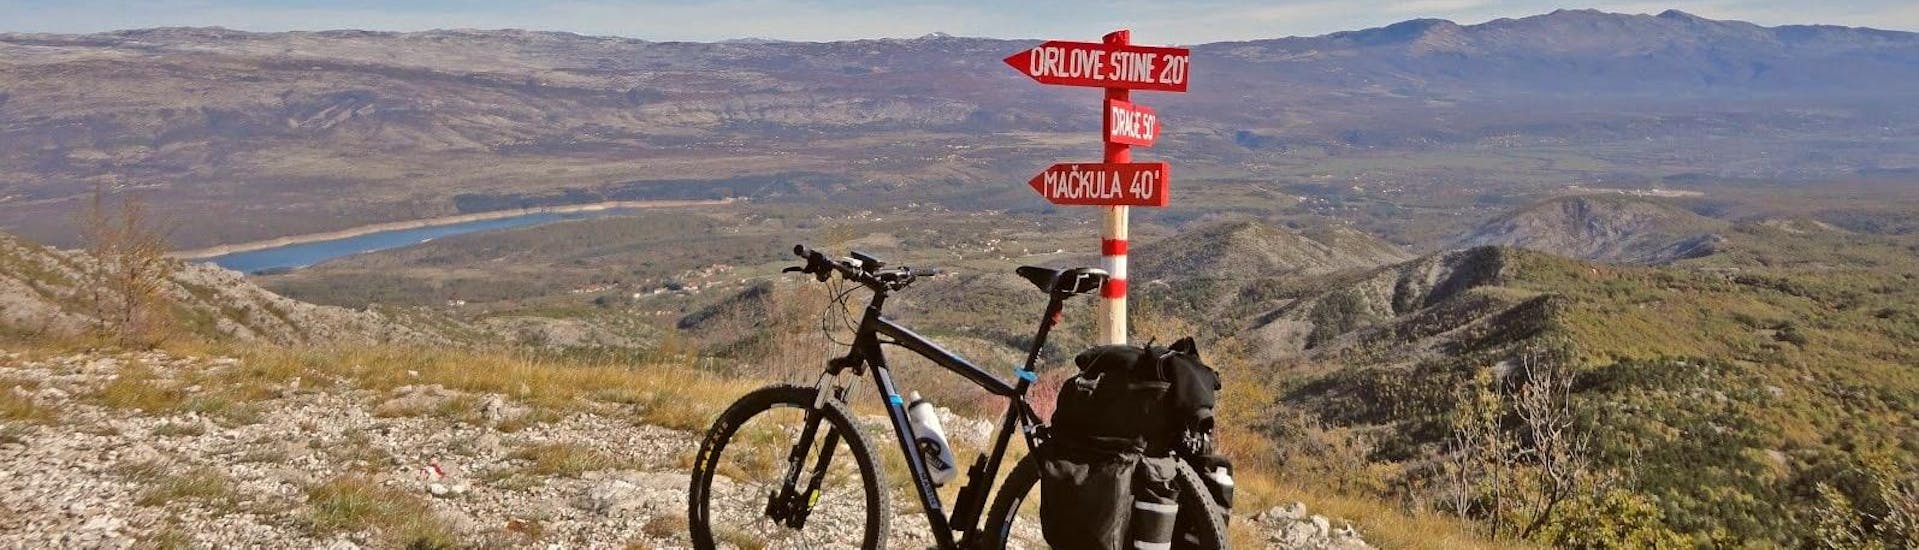 A cyclist left a bike on a fork and went to a viewing point during the Extreme Svilaja Mountain Bike Tour incl. Transfer from Split organised by Hotel Alkar.